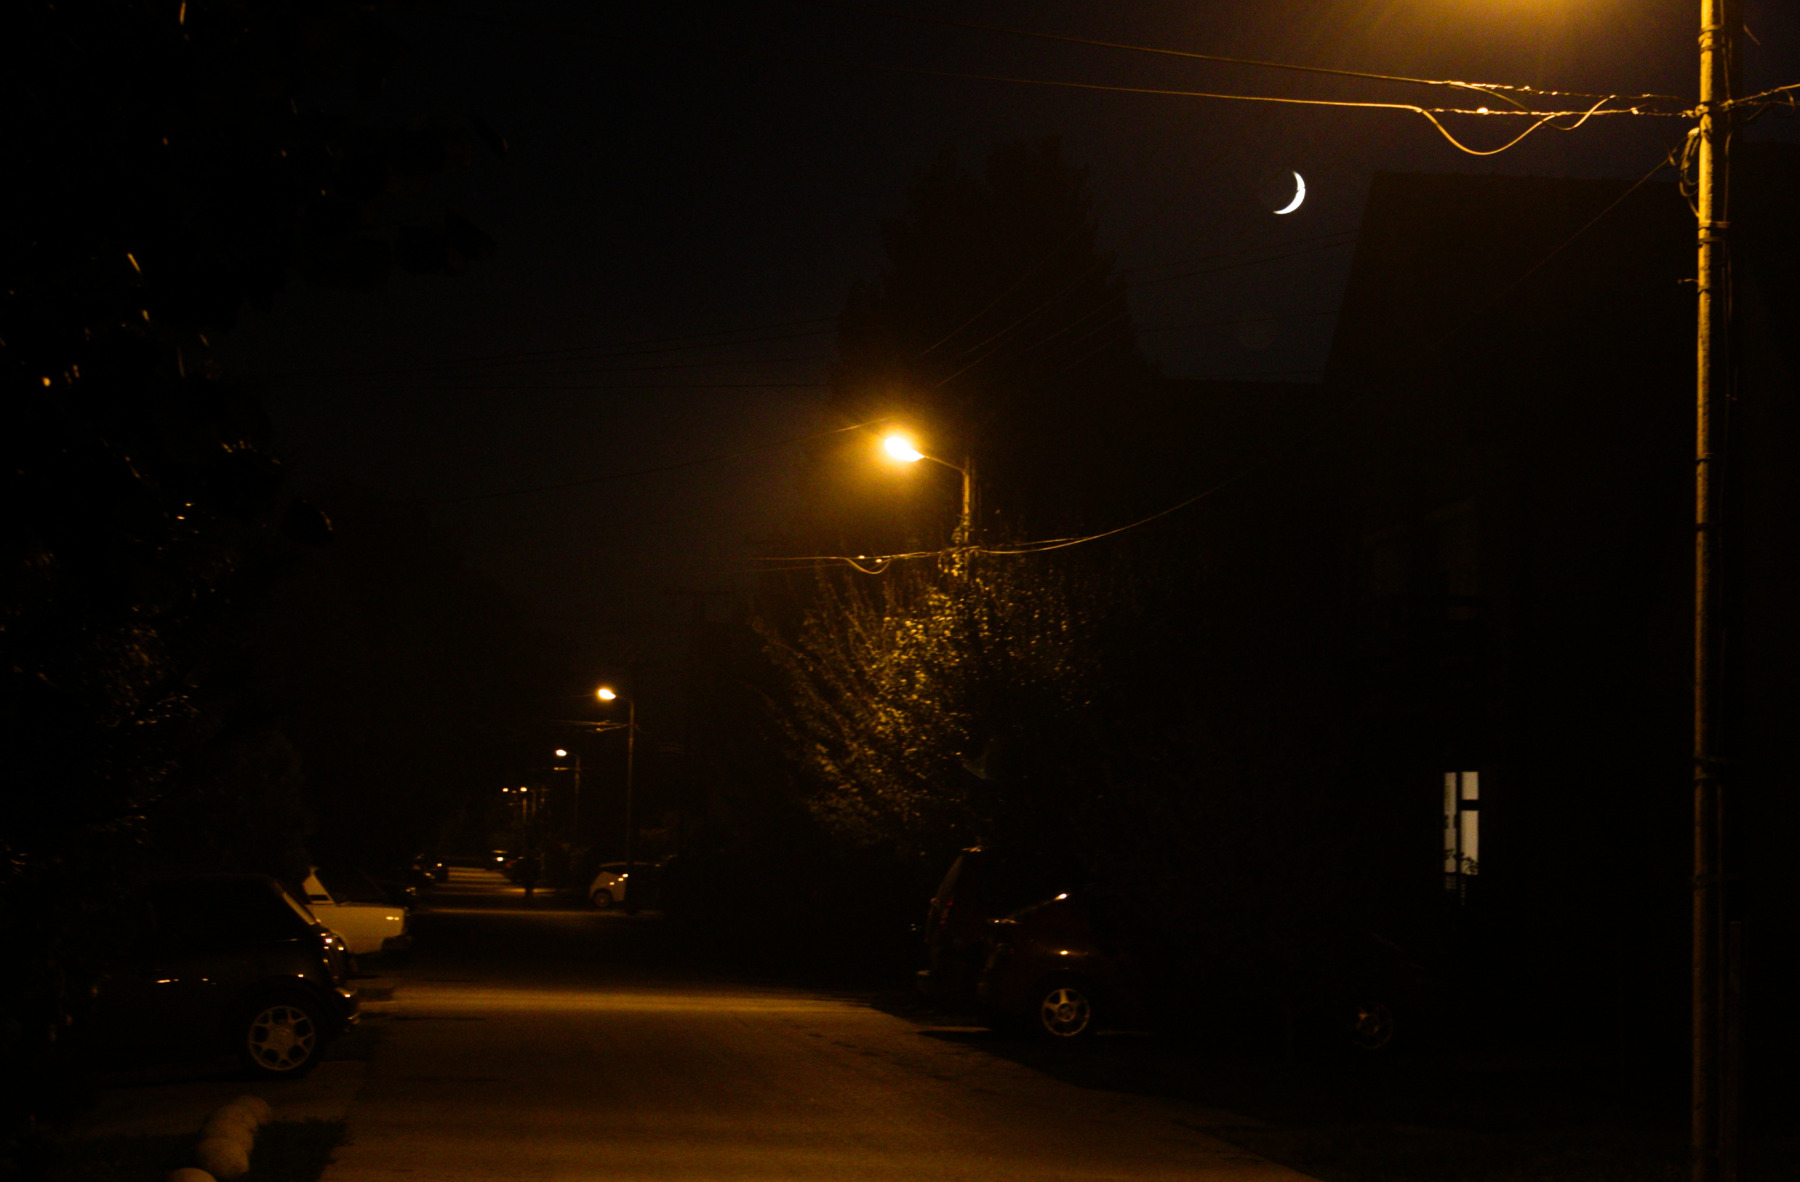 I shot this for the young moon. The shop window is on the right.